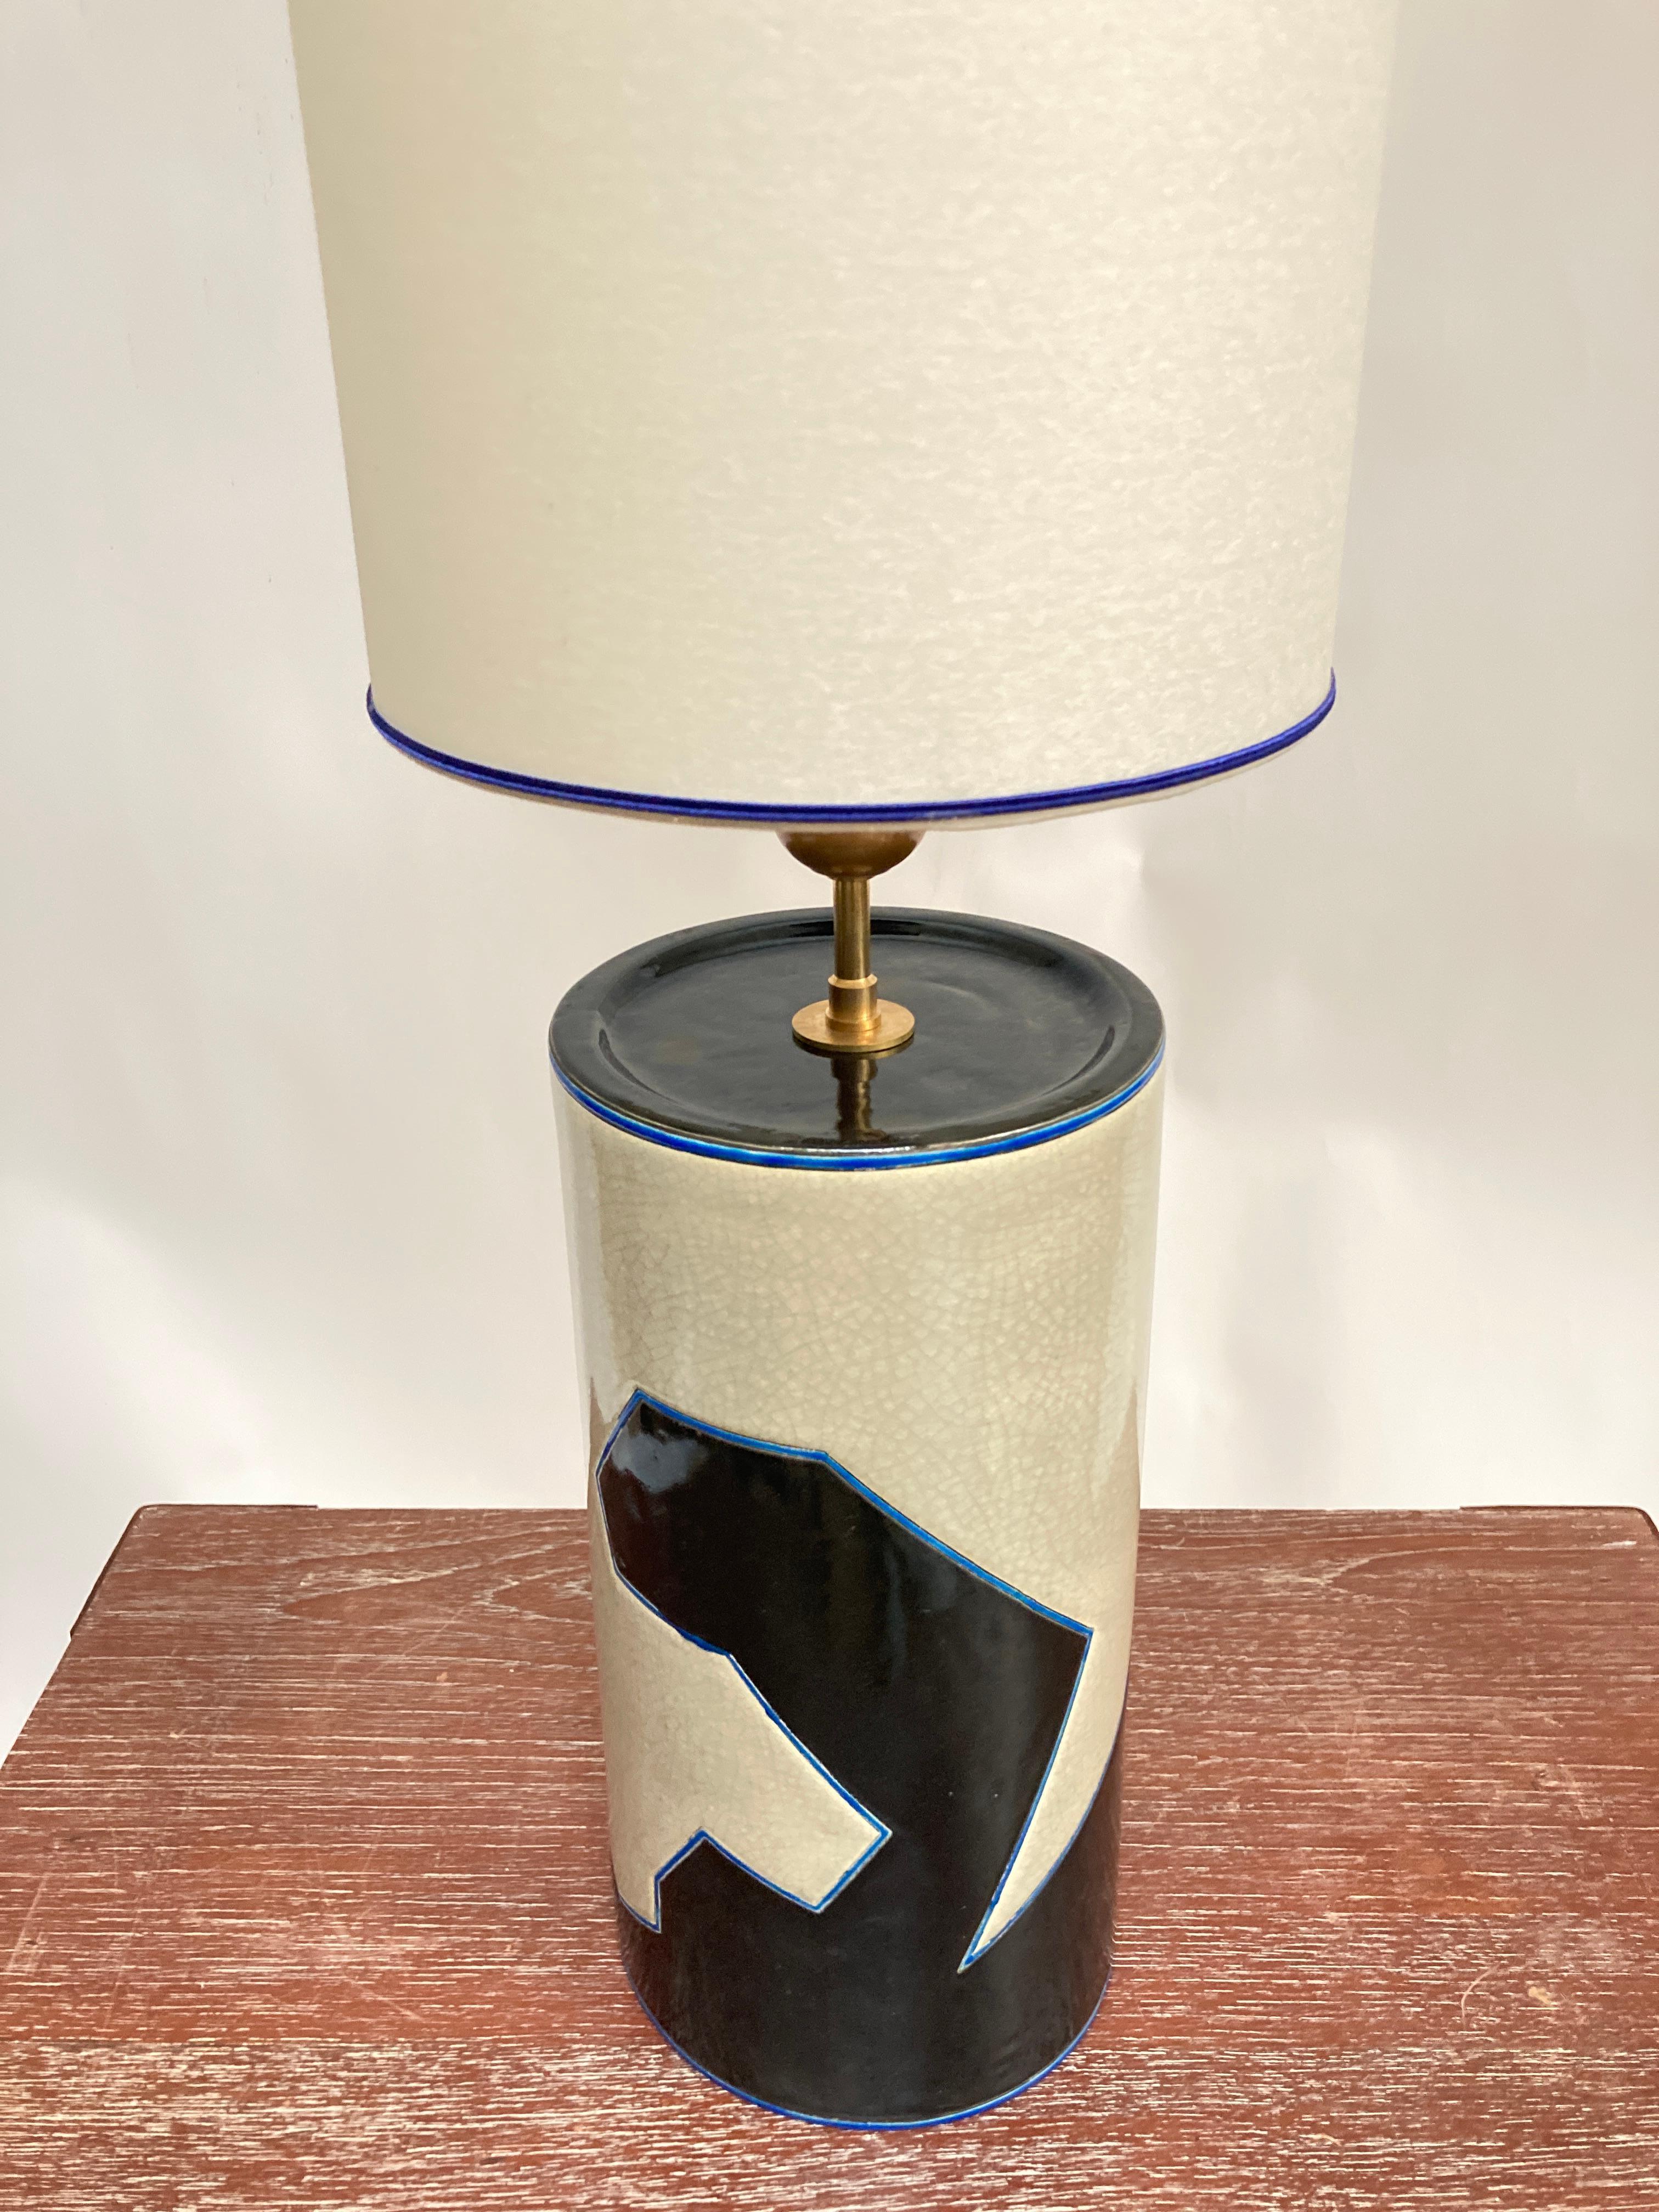 Rare 1980's Ceramic lamp By Emaux de Longwy ( North East of France )
Dimensions given without shade
No shade included